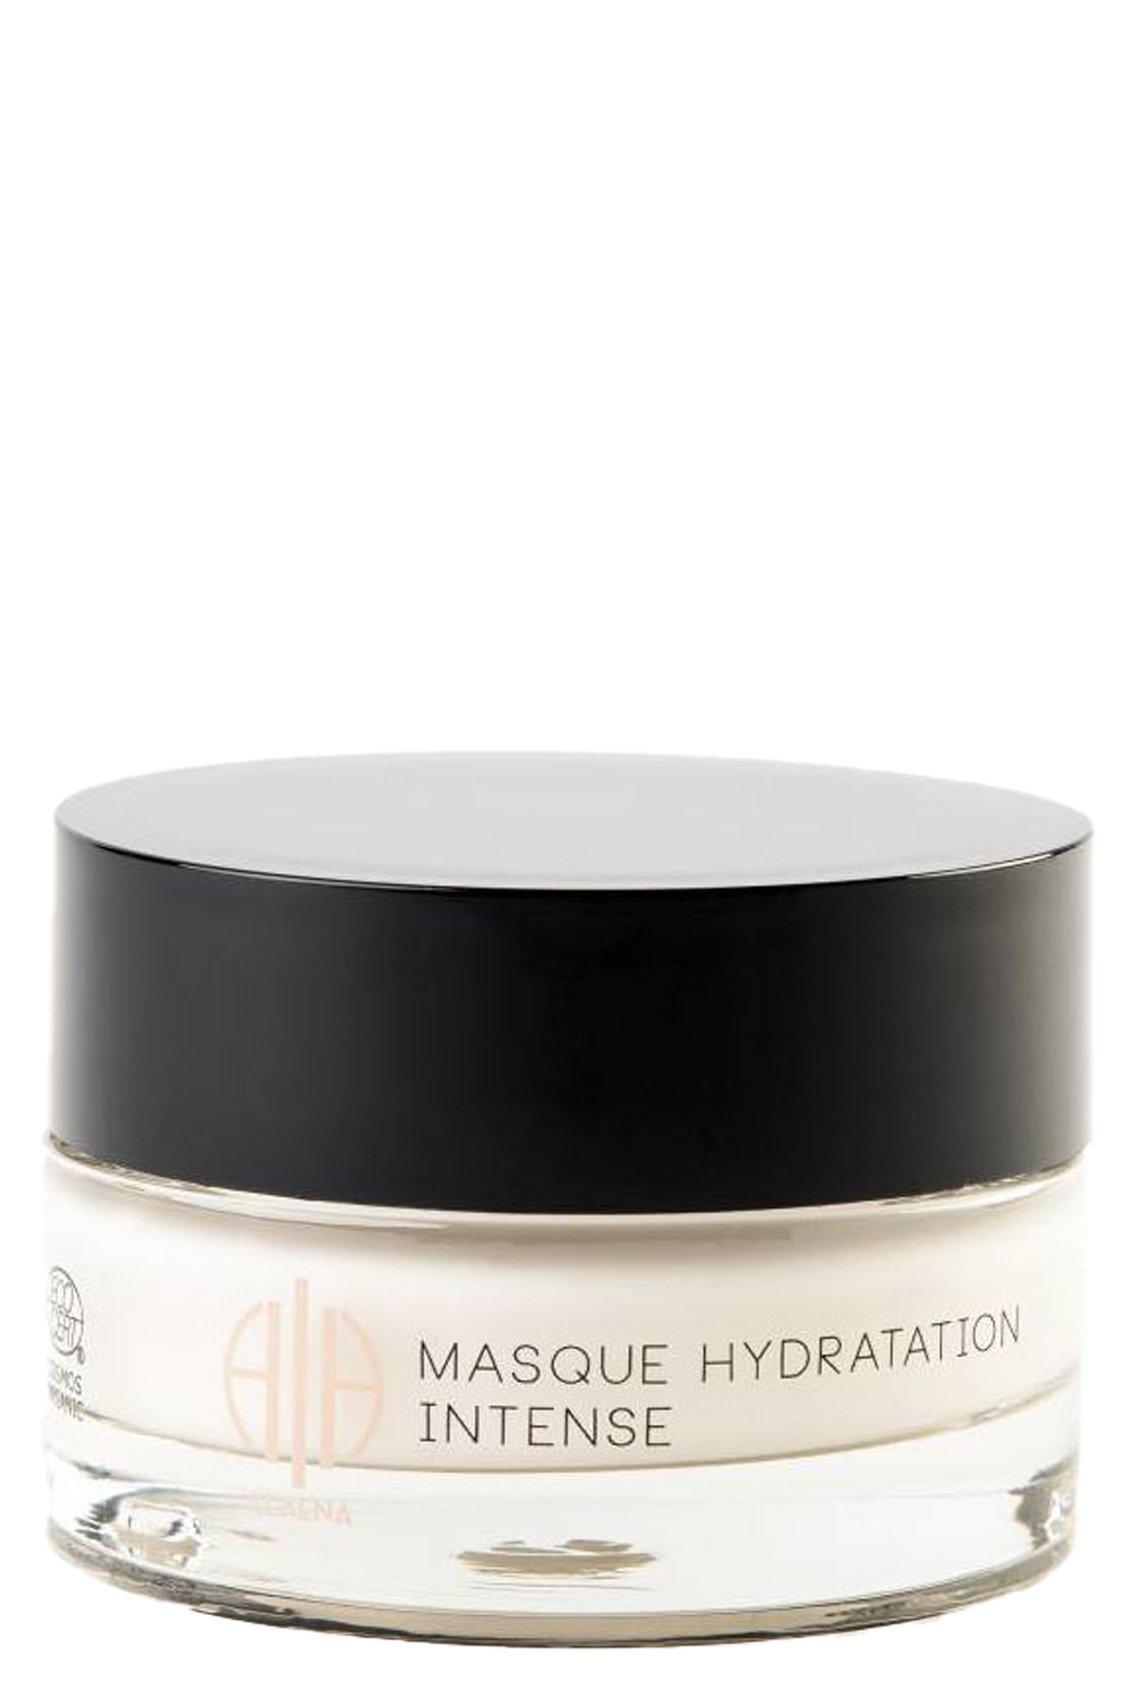 Indisponible : Masque Hydratation Intense Unavailable: Intense Hydration Mask - Alaena